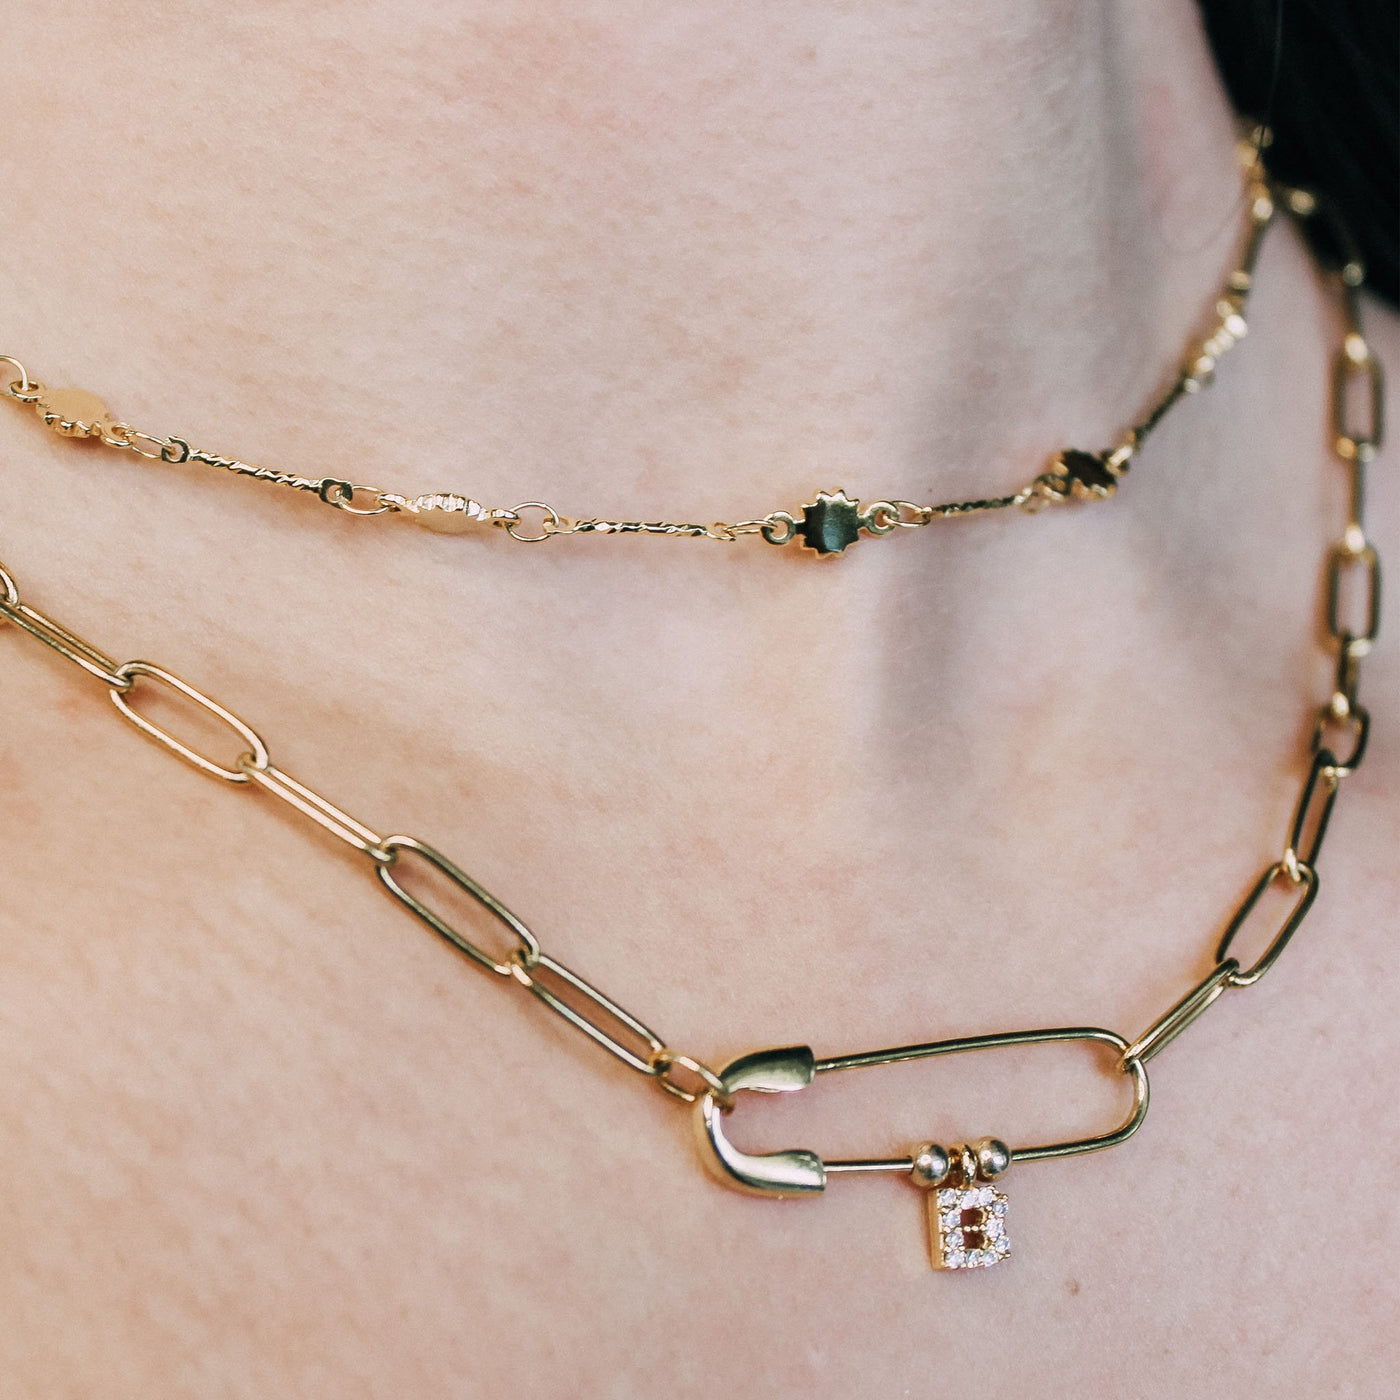 Safety Pin and Lock Chain Necklace gold